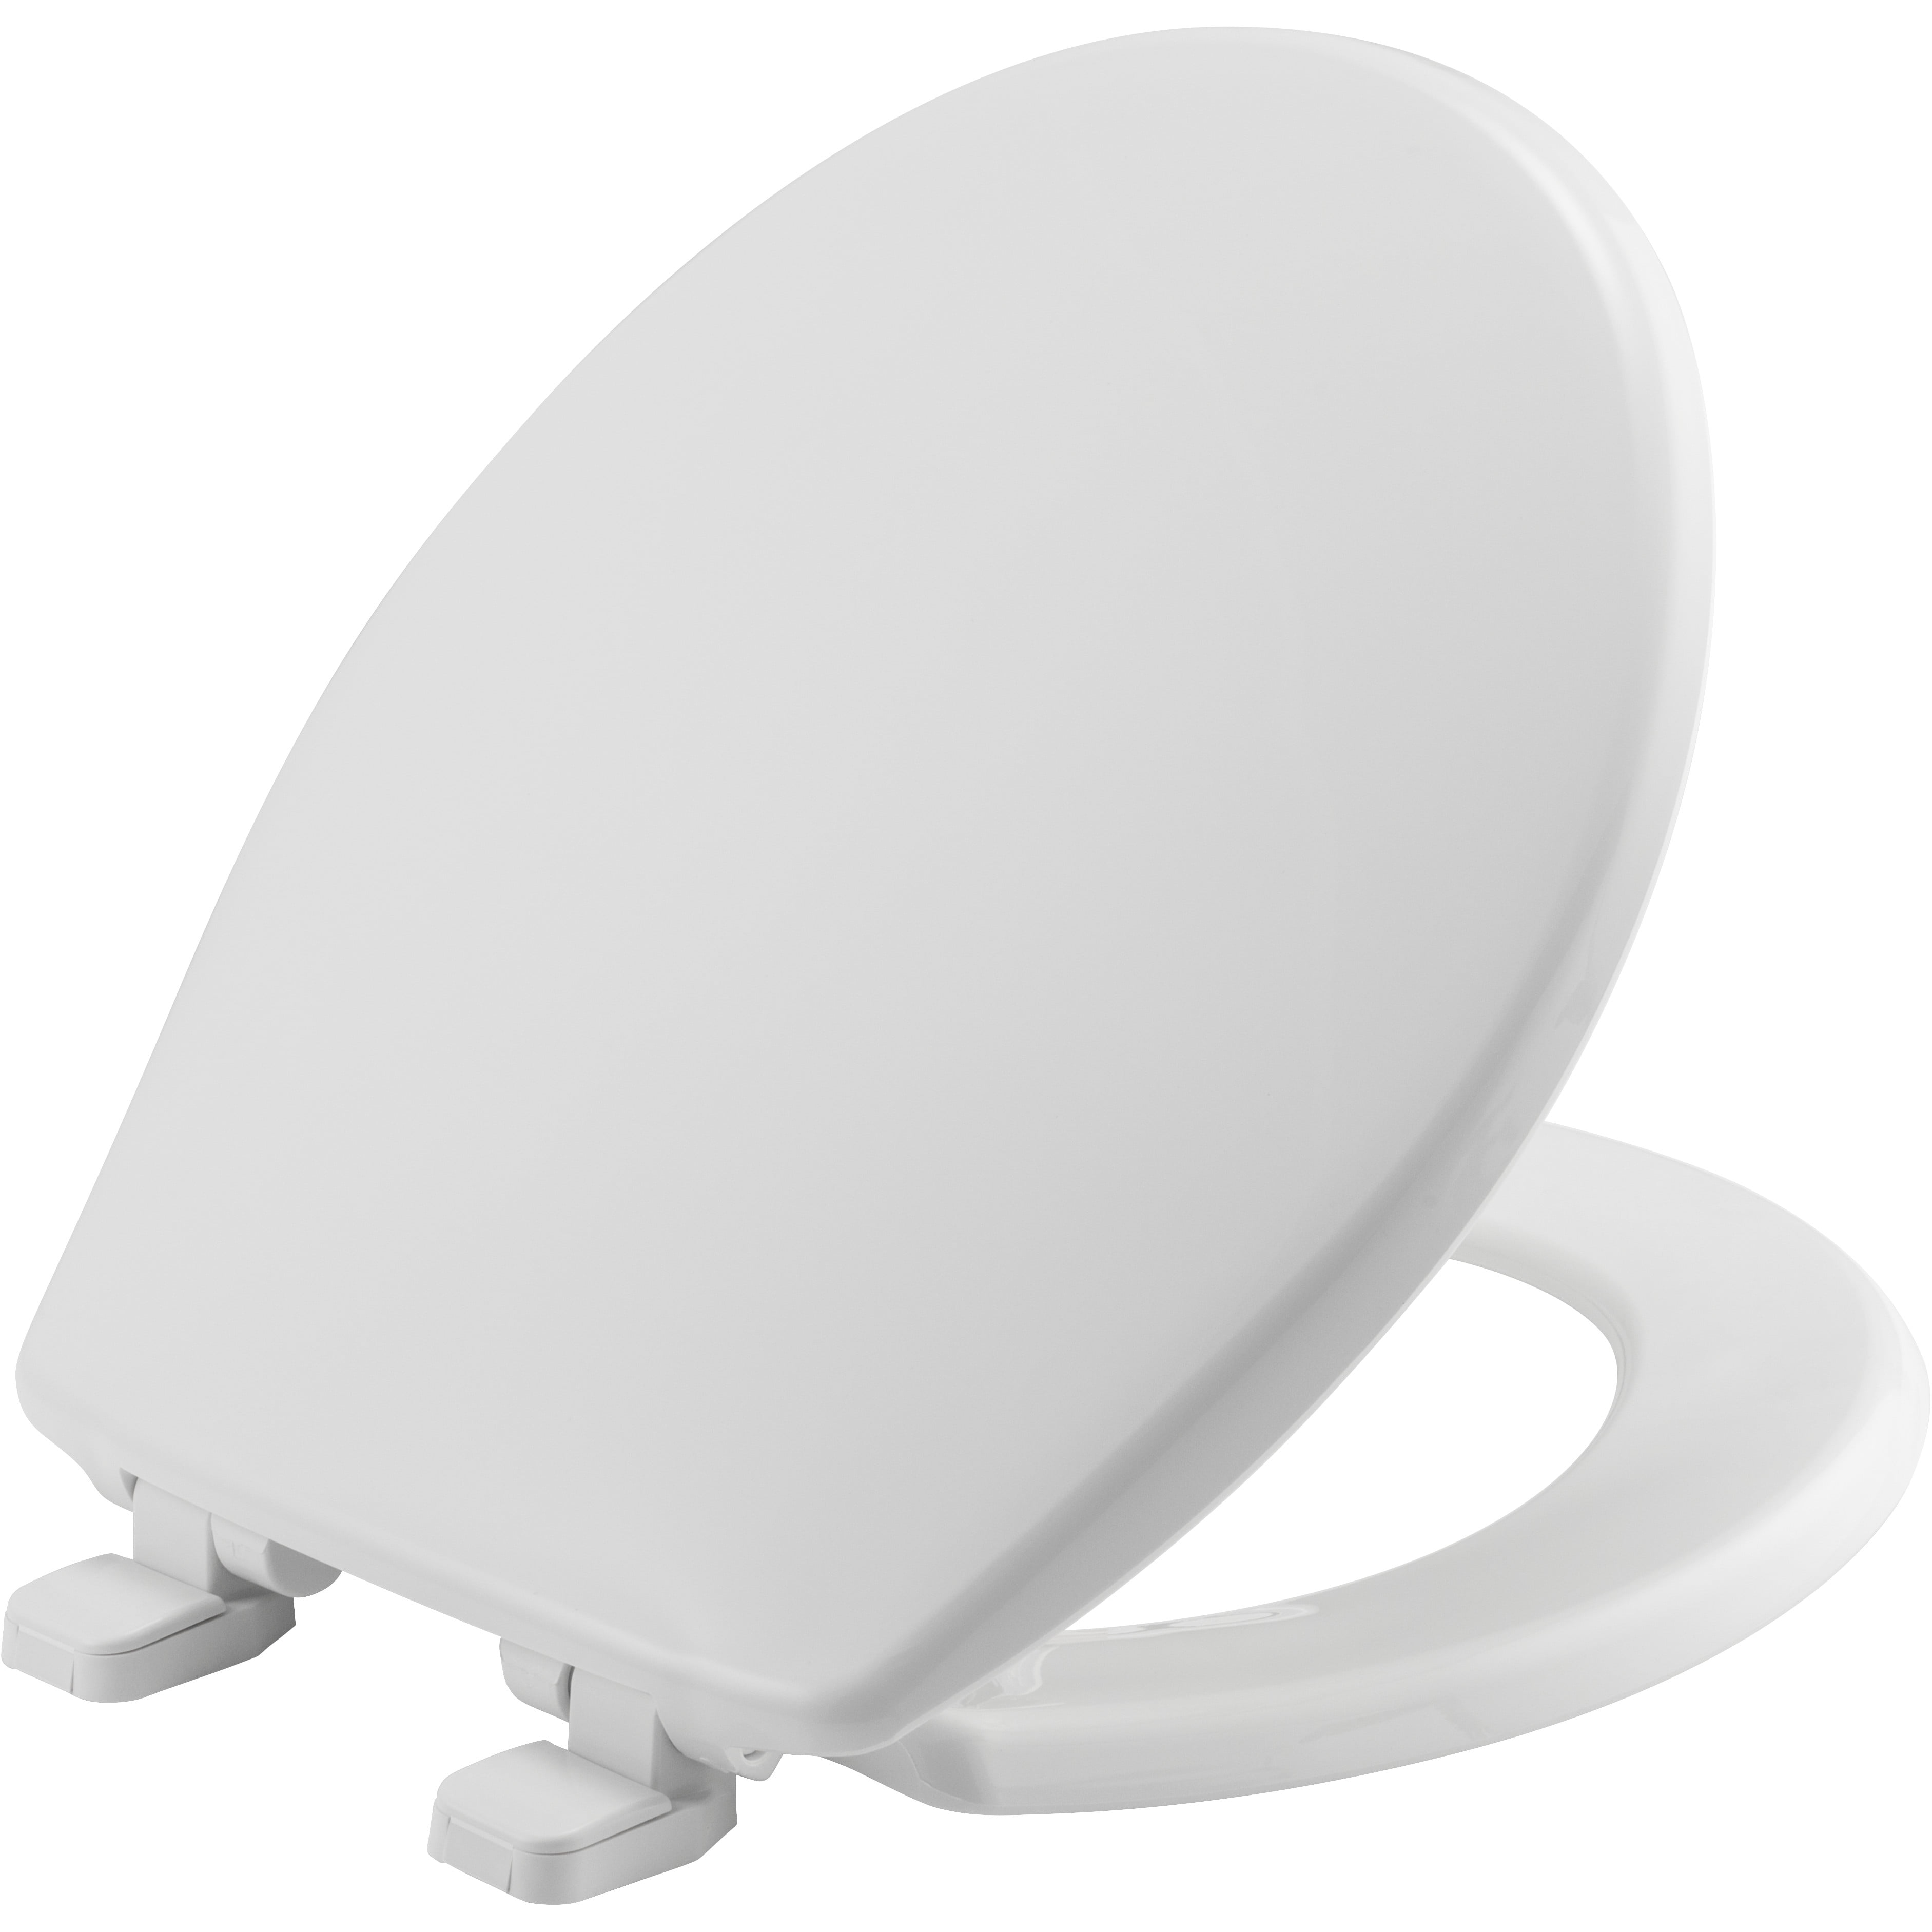 MAYFAIR 1843SLOW 000 Lannon Toilet Seat will Slow Close and Never Loosen ELONGATED Durable Enameled Wood White